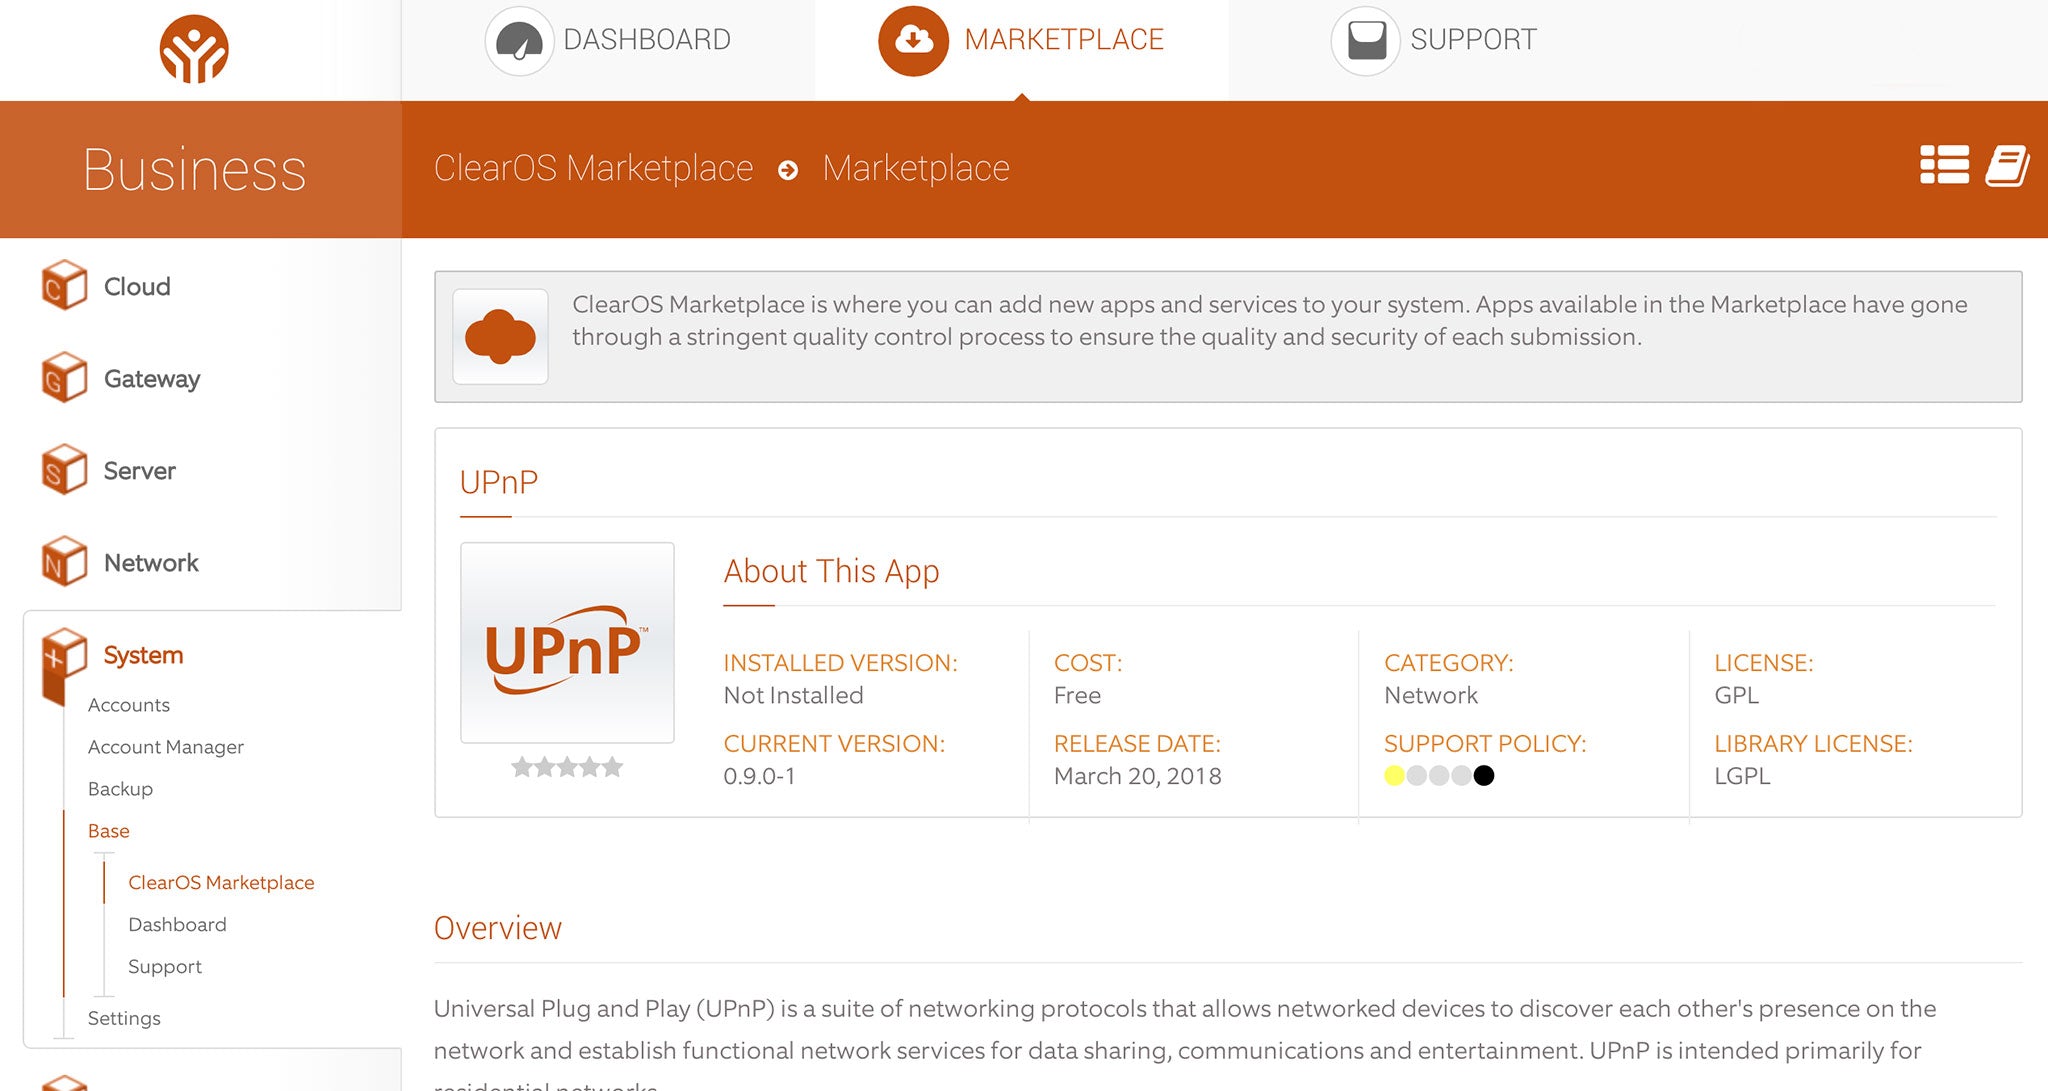 MiniUPnP App Now Live in ClearOS Marketplace